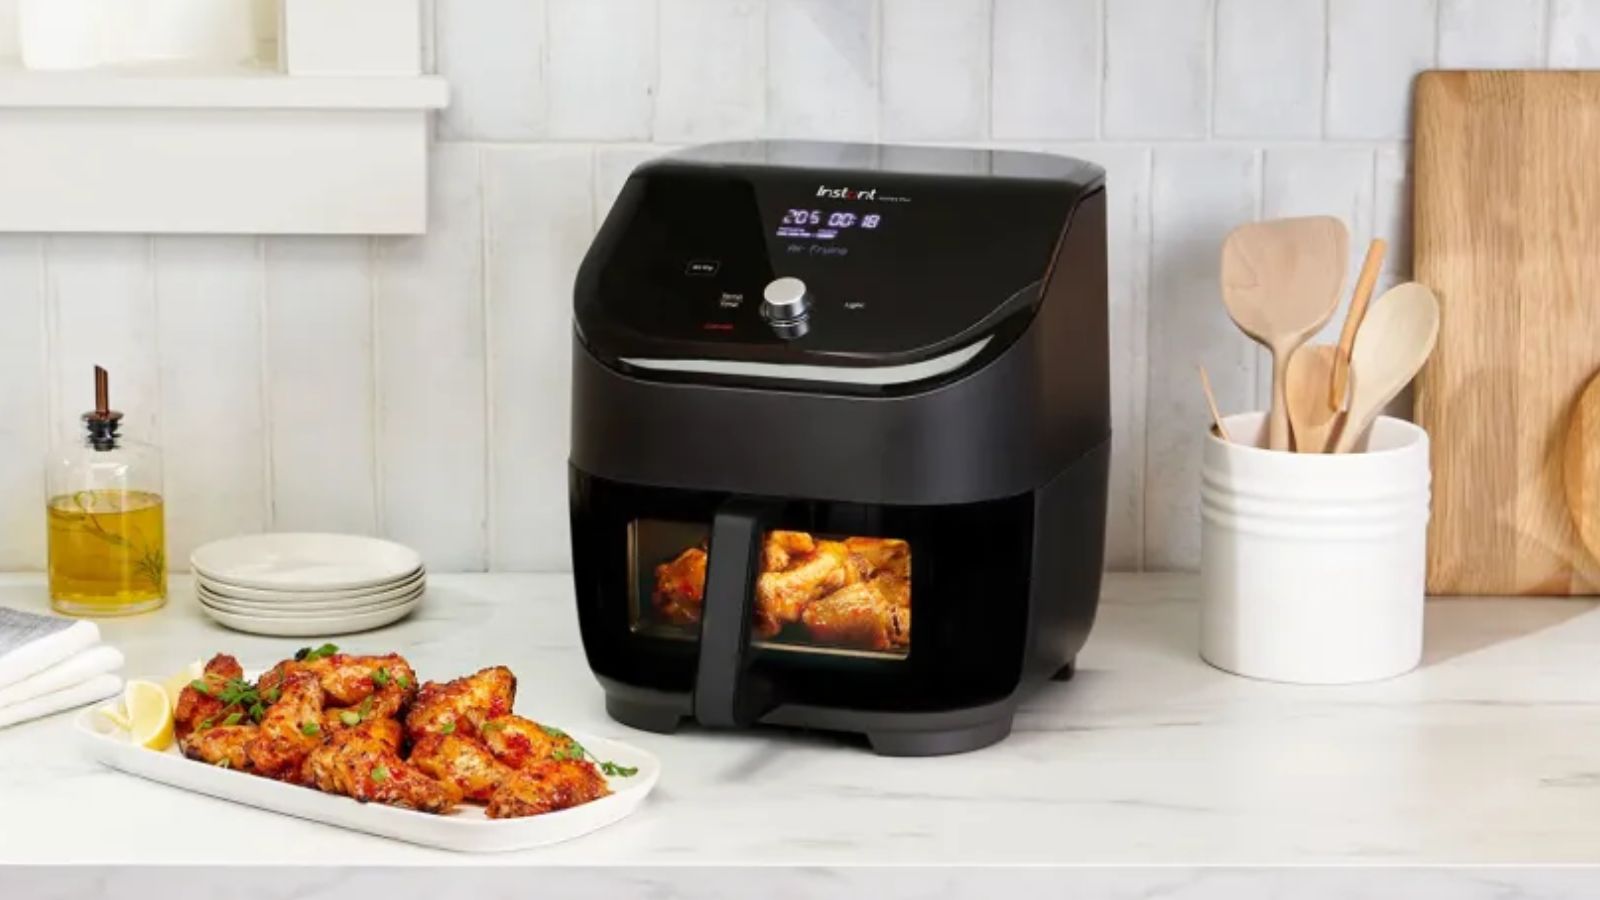 This Philips Air Fryer is just £50 in Black Friday deal!